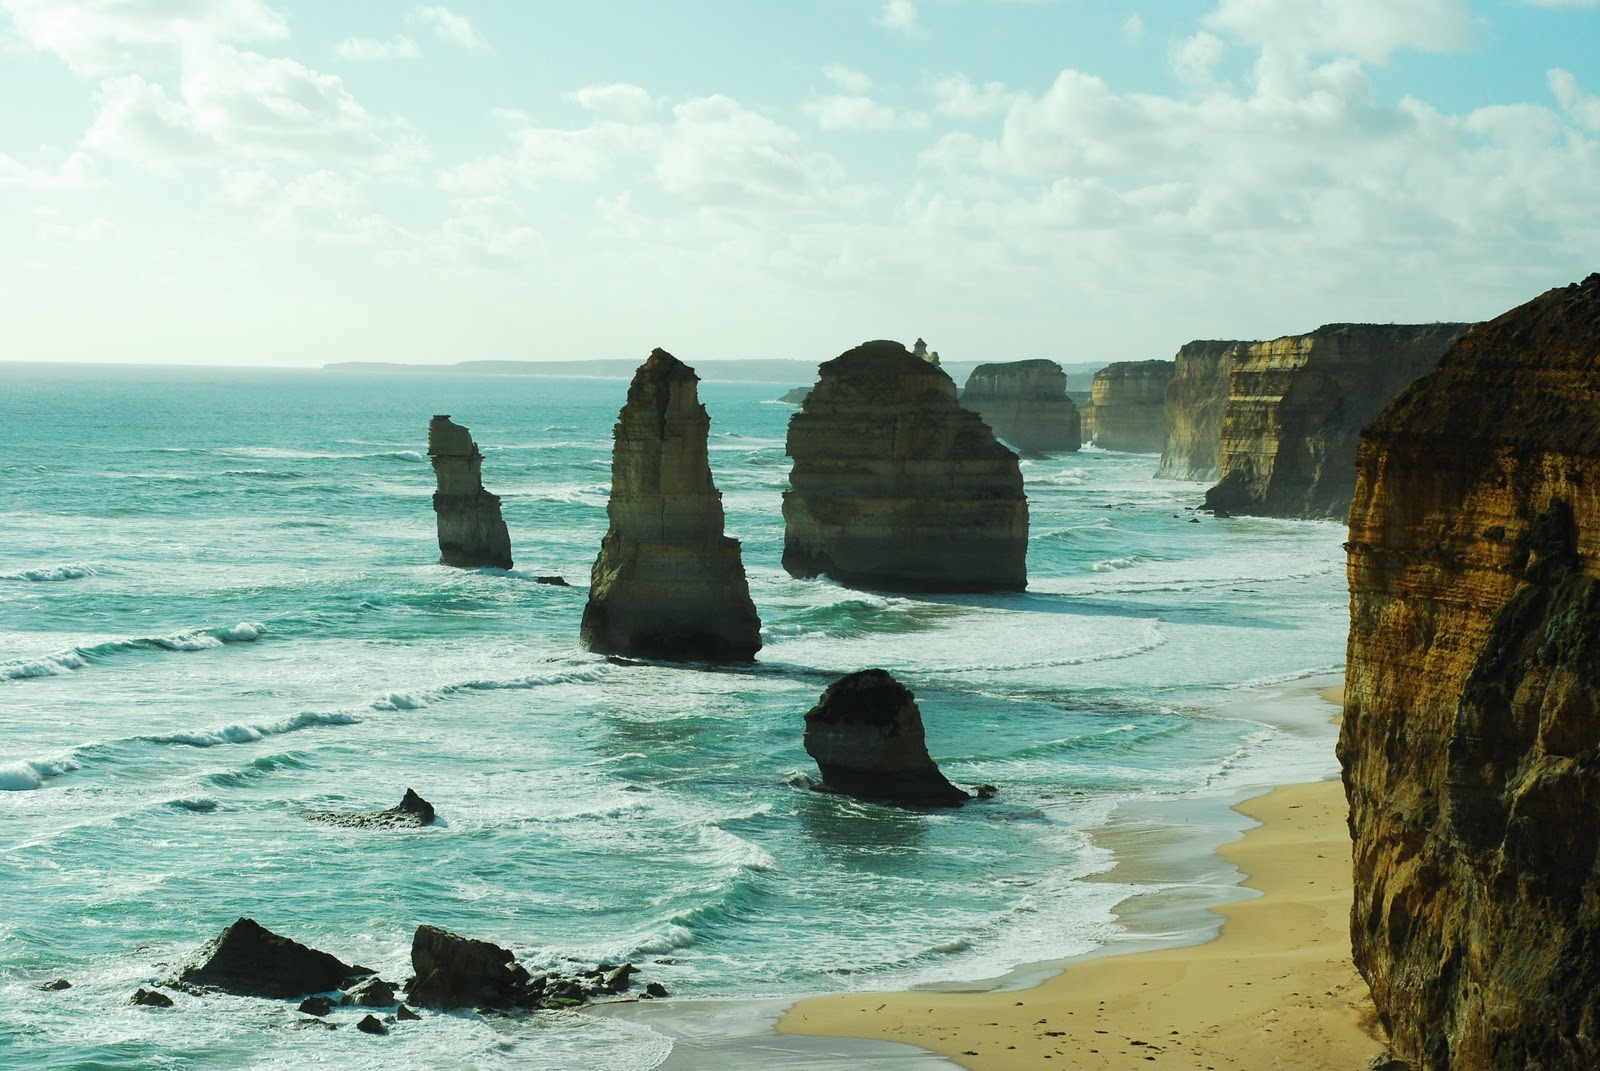 Carly Goes Down Under: The Great Ocean Road